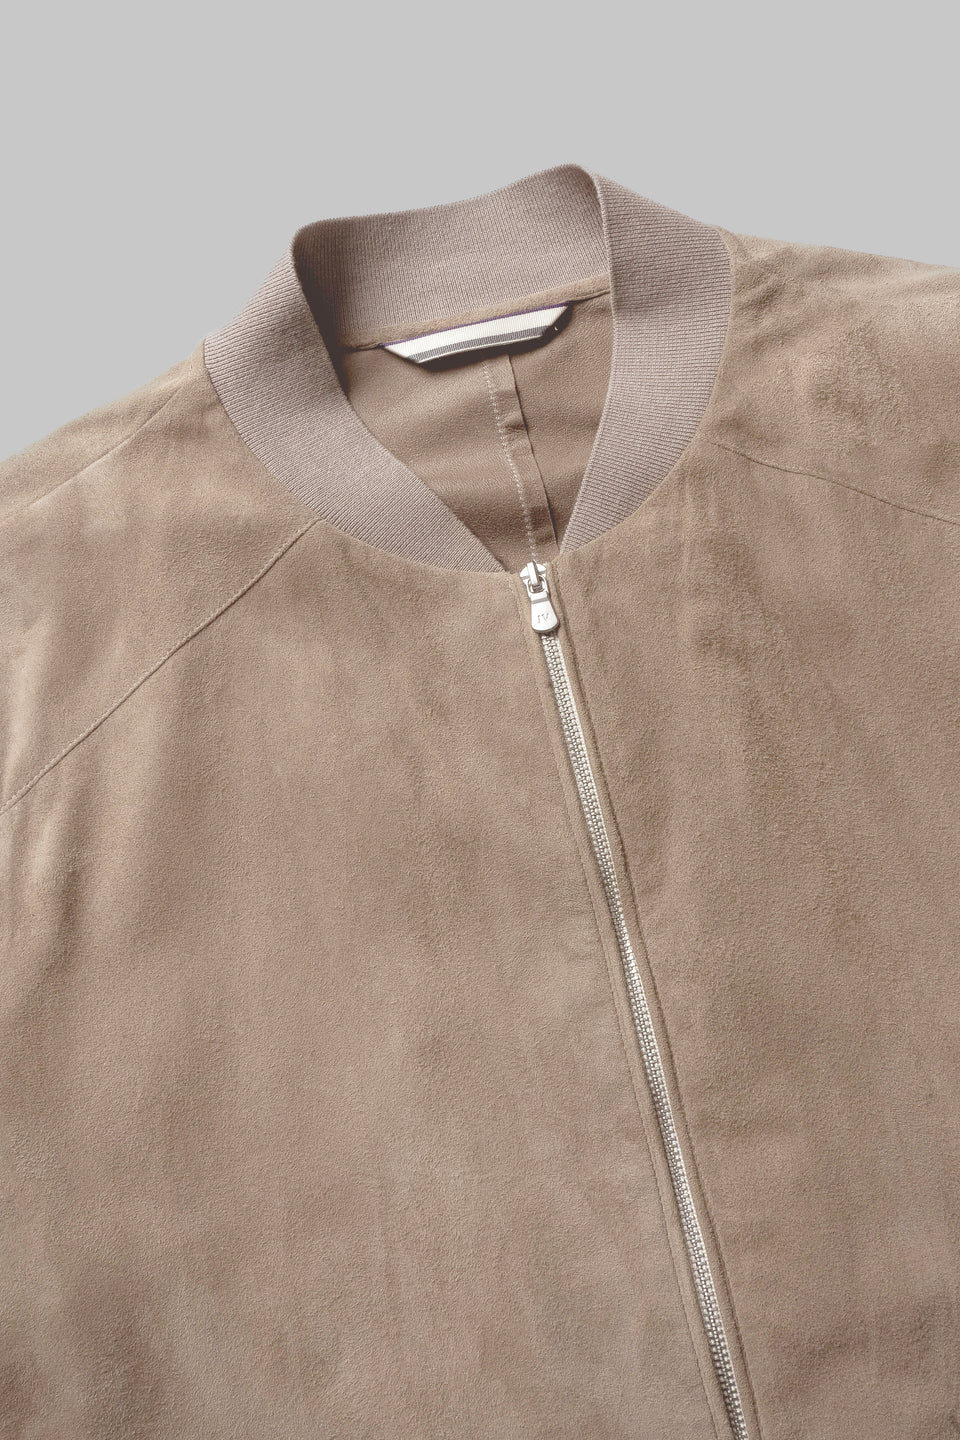 BARCLAY SUEDE BOMBER JACKET IN TAN